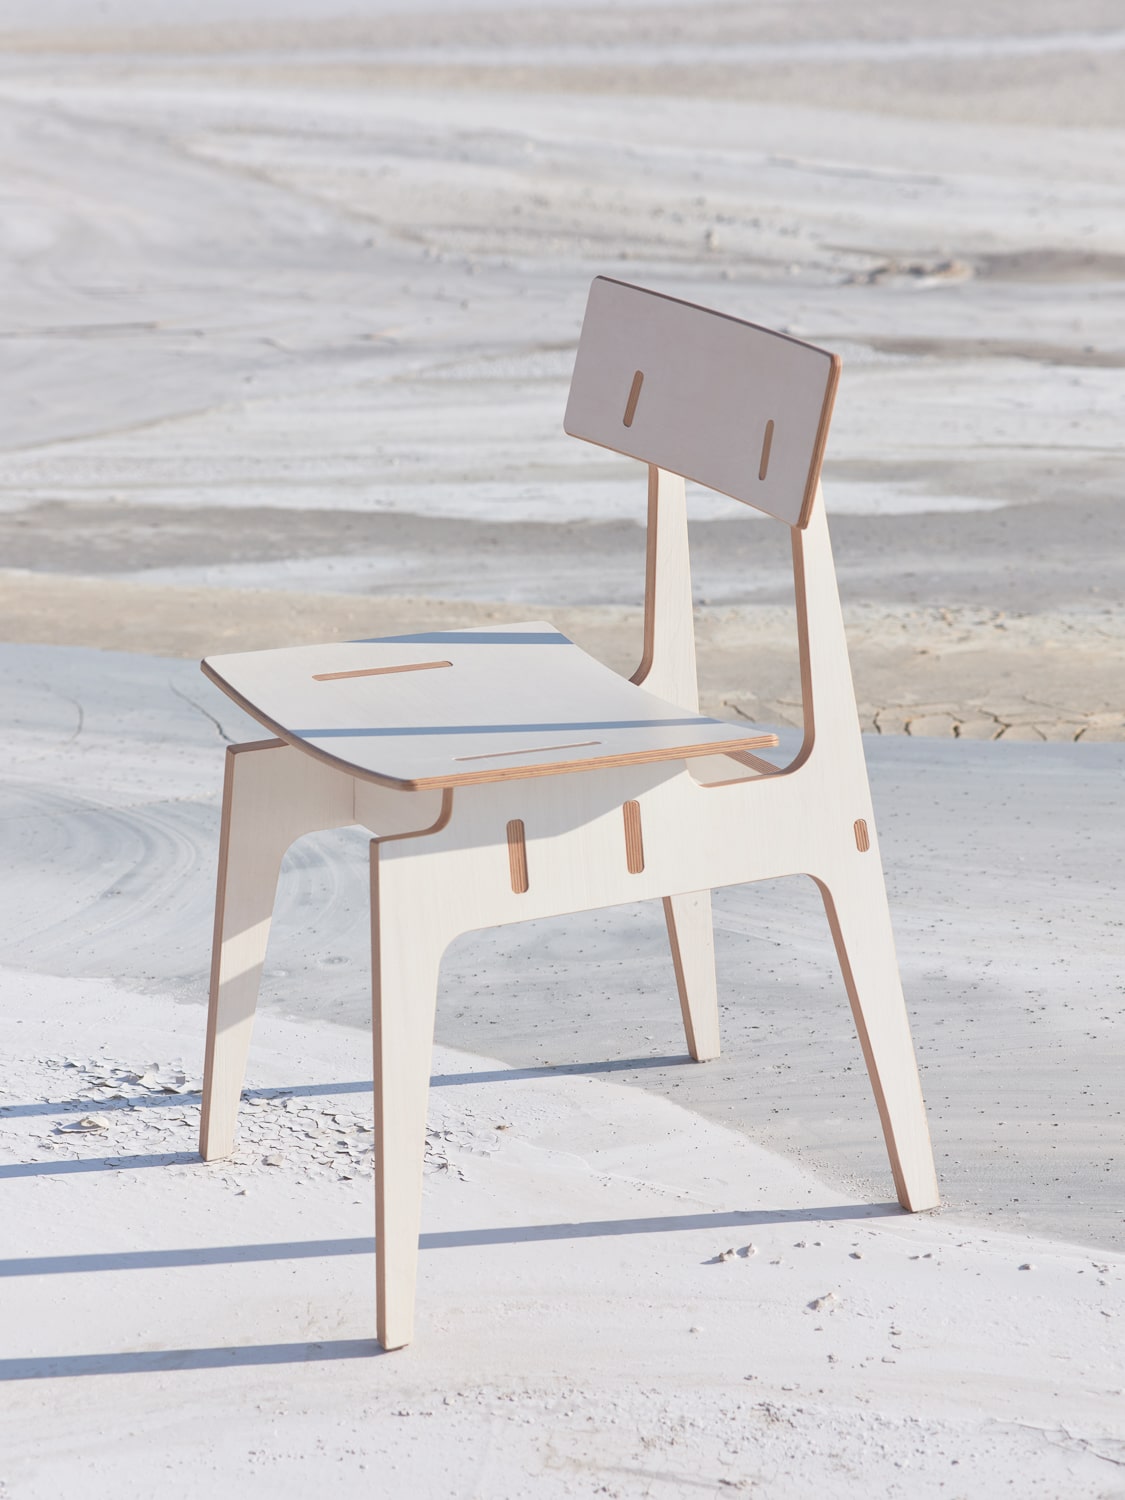 Front View of Birch Plywood Chair from the Langskip Leidangskip Dining Room Furniture